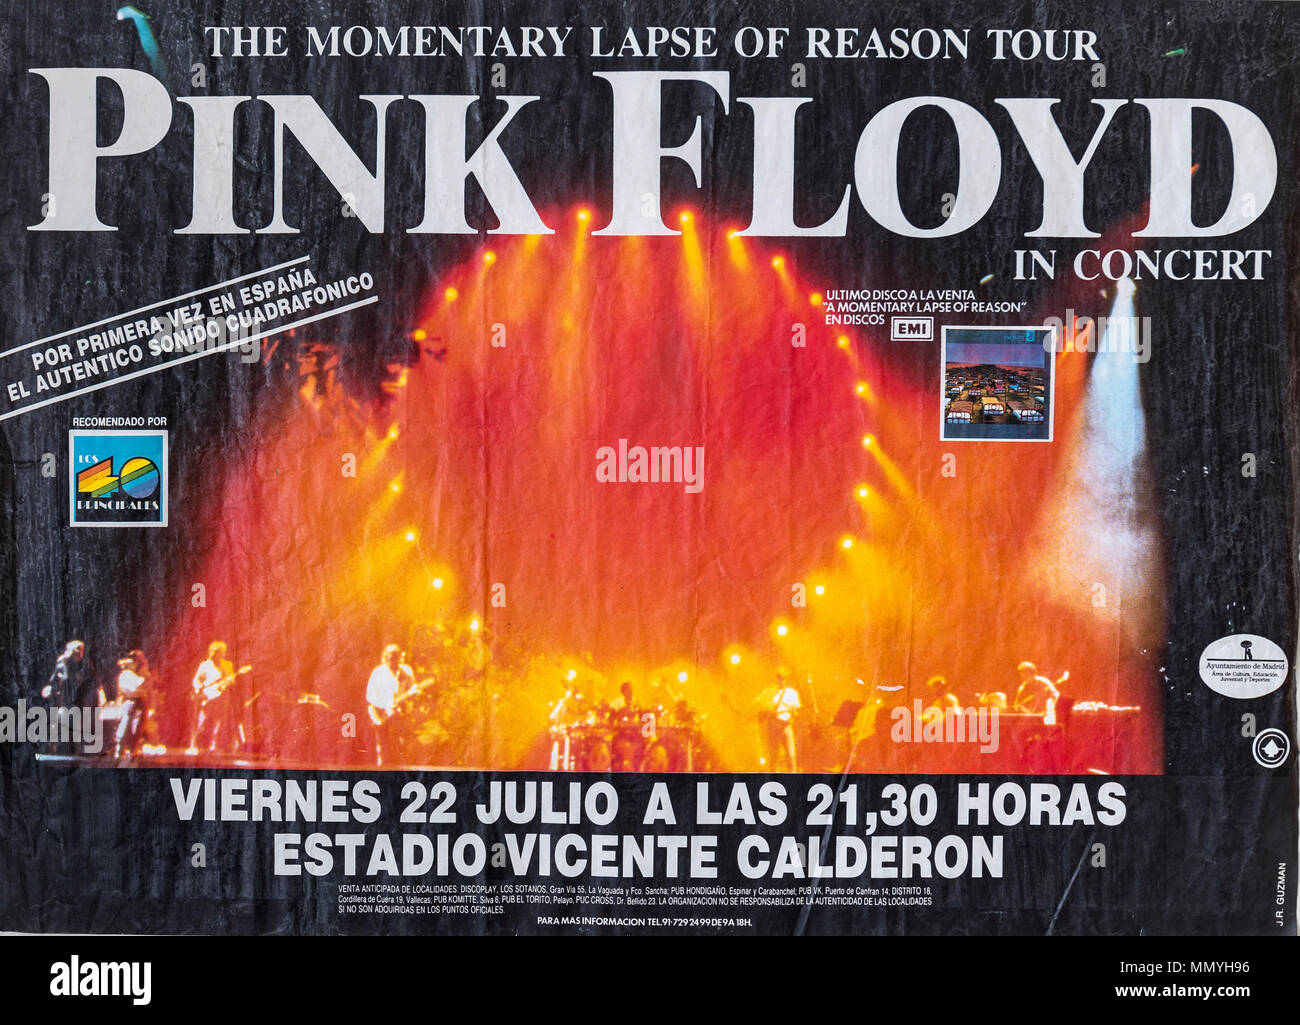 Pink Floyd in concert 1988, The Momentary Lapse of Reason Tour, Musical concert poster Stock Photo